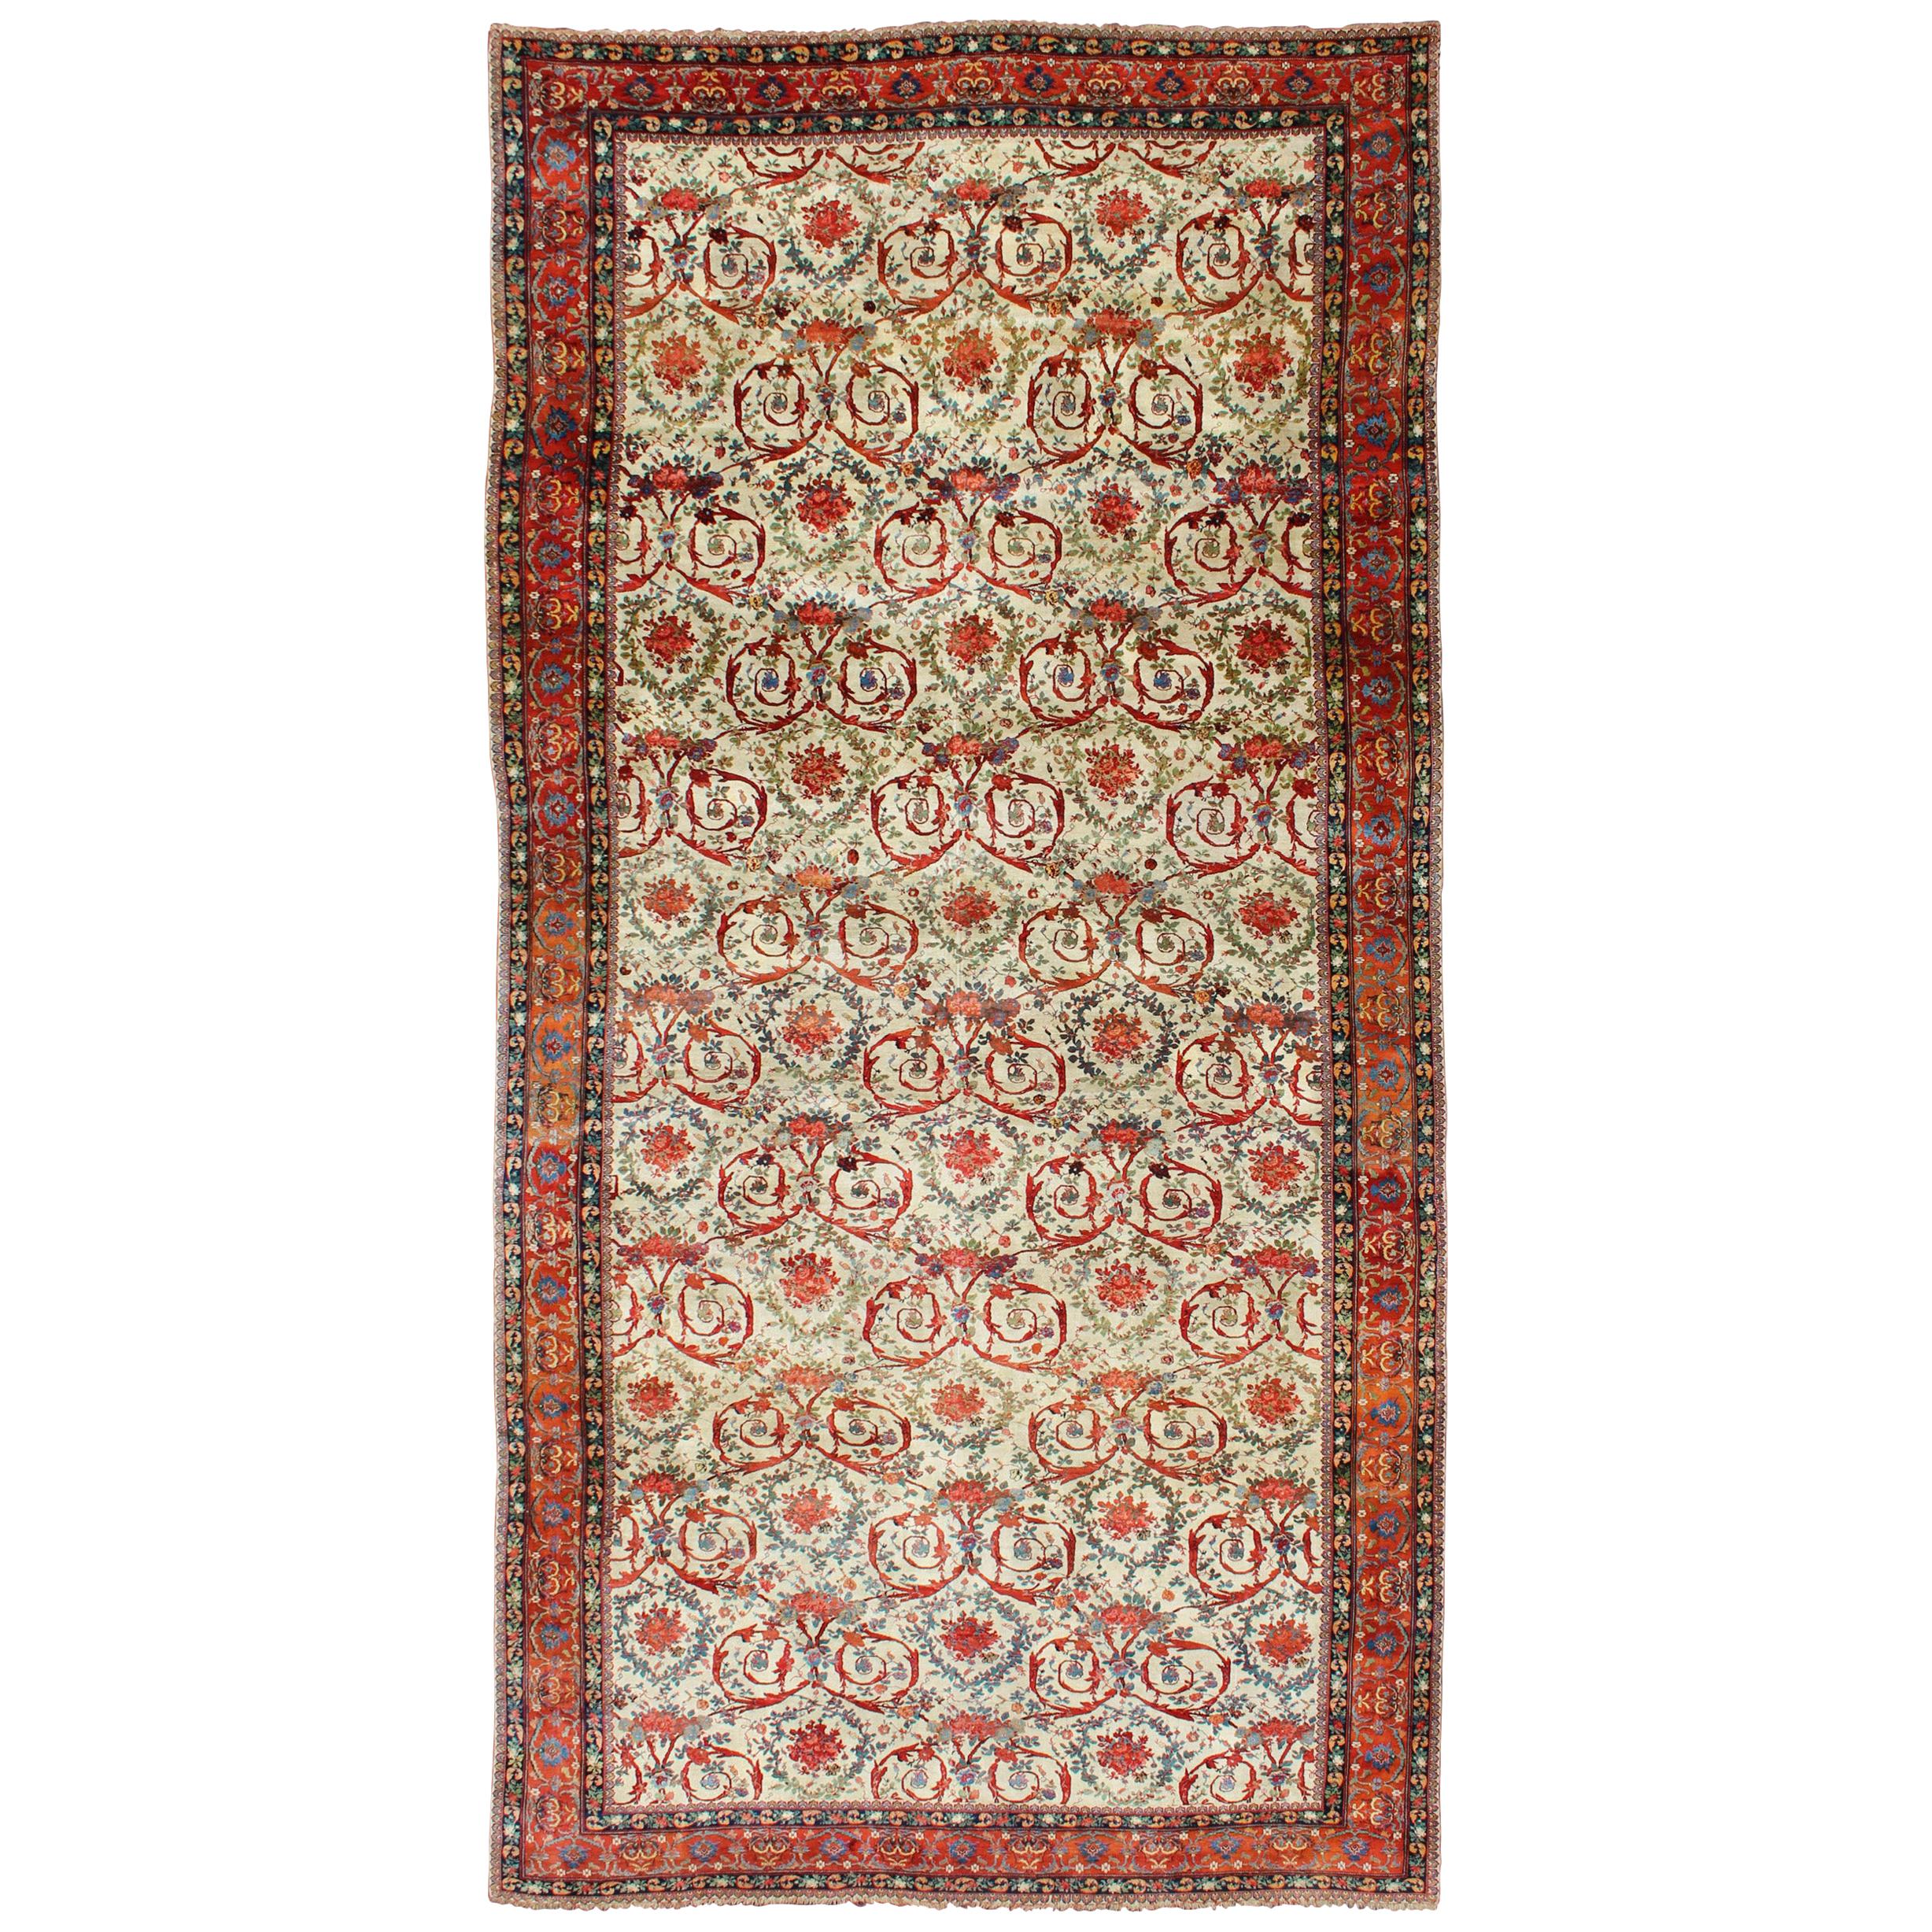 Very Large Antique Persian Bidjar Carpet in Ivory Background and Multi-Colors